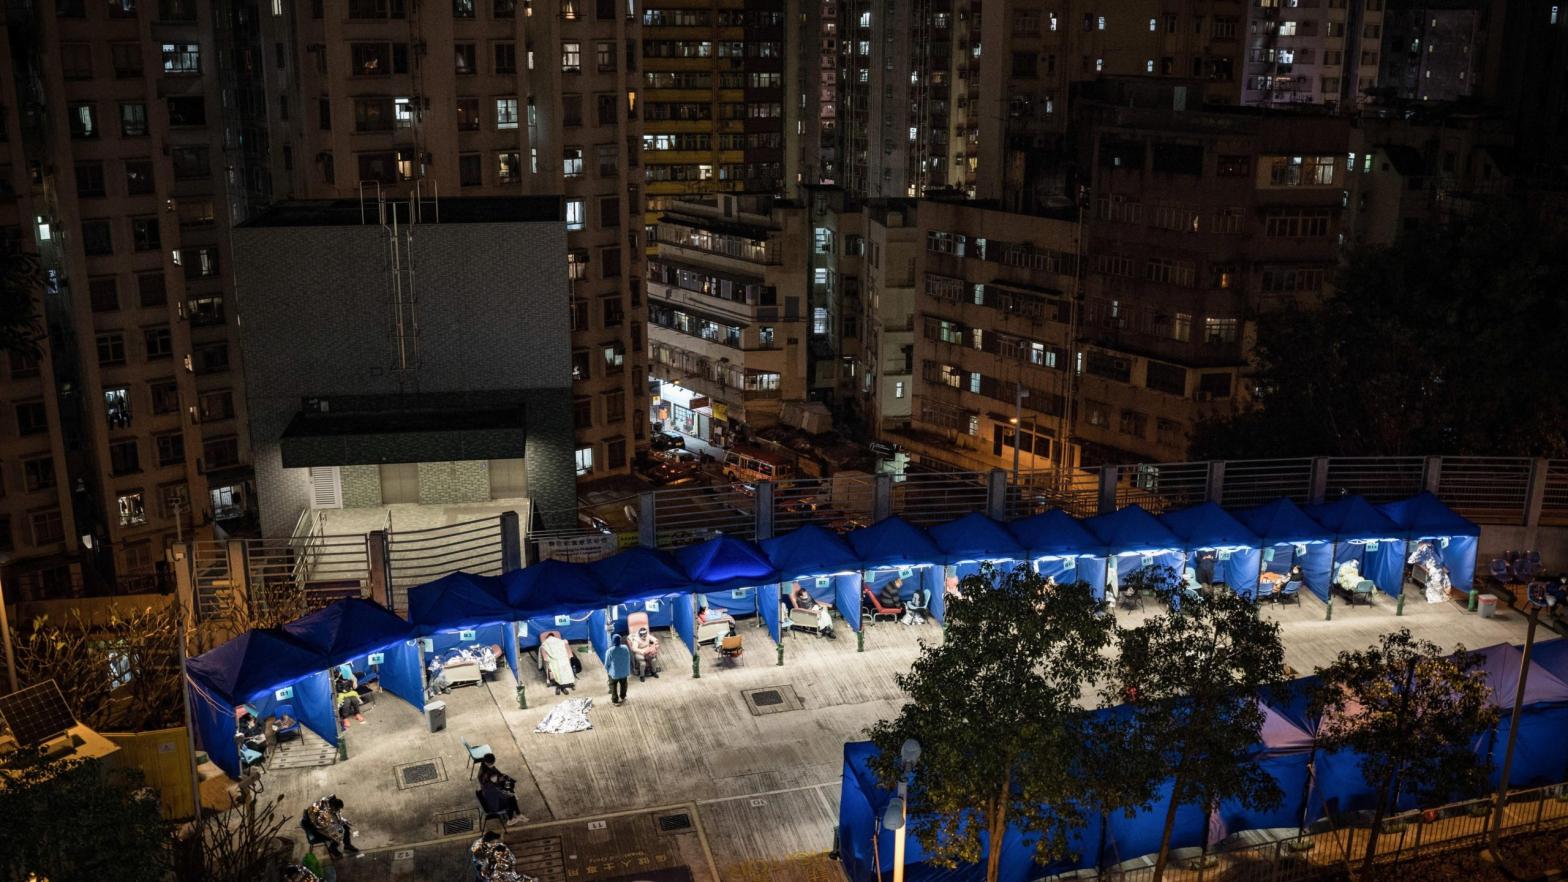 Temporary tents are set for covid-19 patients to rest outside Caritas Medical Centre in Sham Shui Po, Hong Kong. (Photo: Dominic Chiu/SOPA Images/LightRocket, Getty Images)